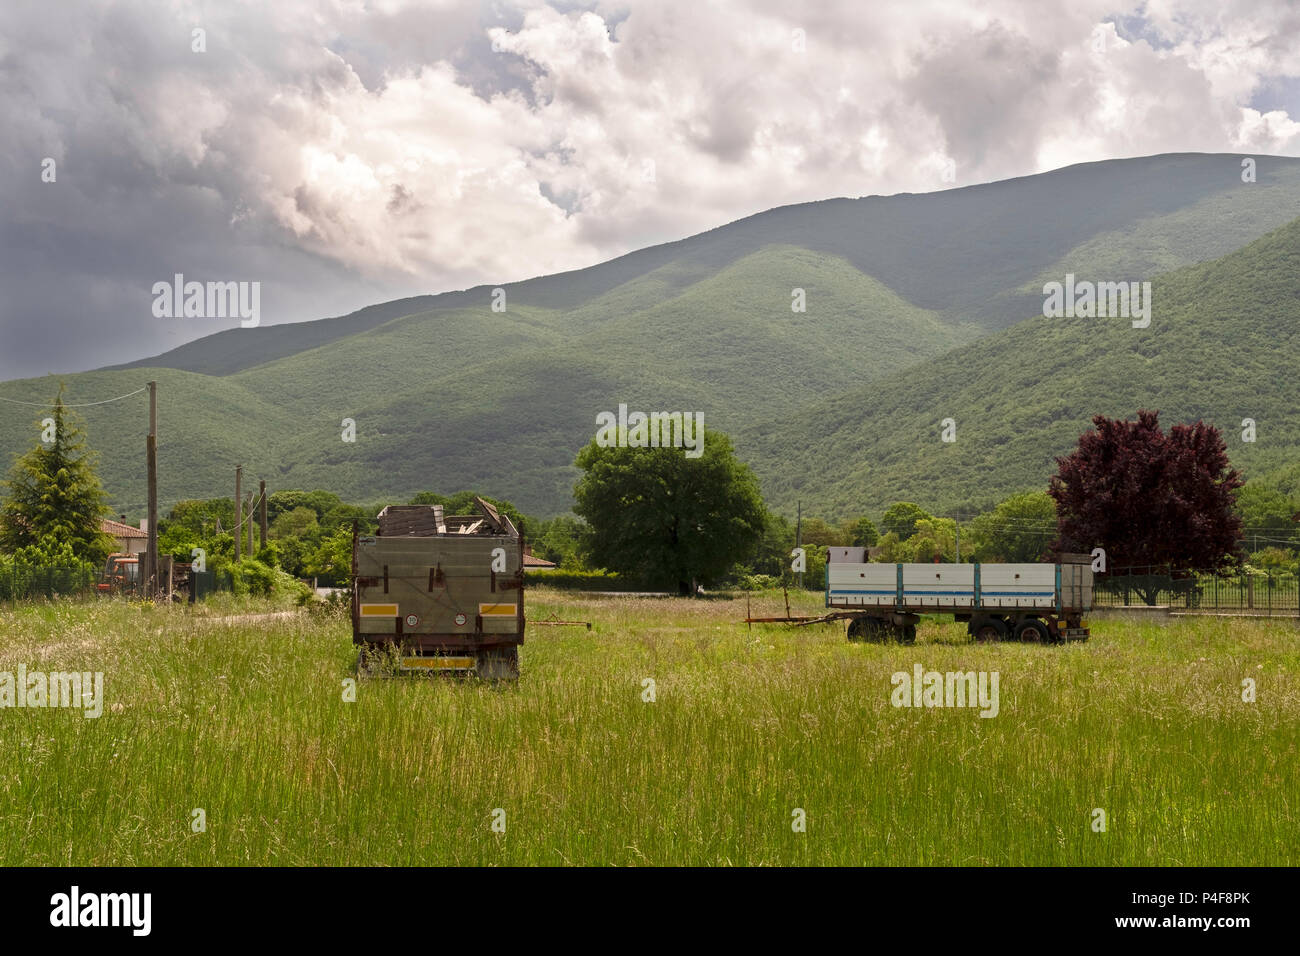 Farmers tractor trailers on a field in Italy Stock Photo